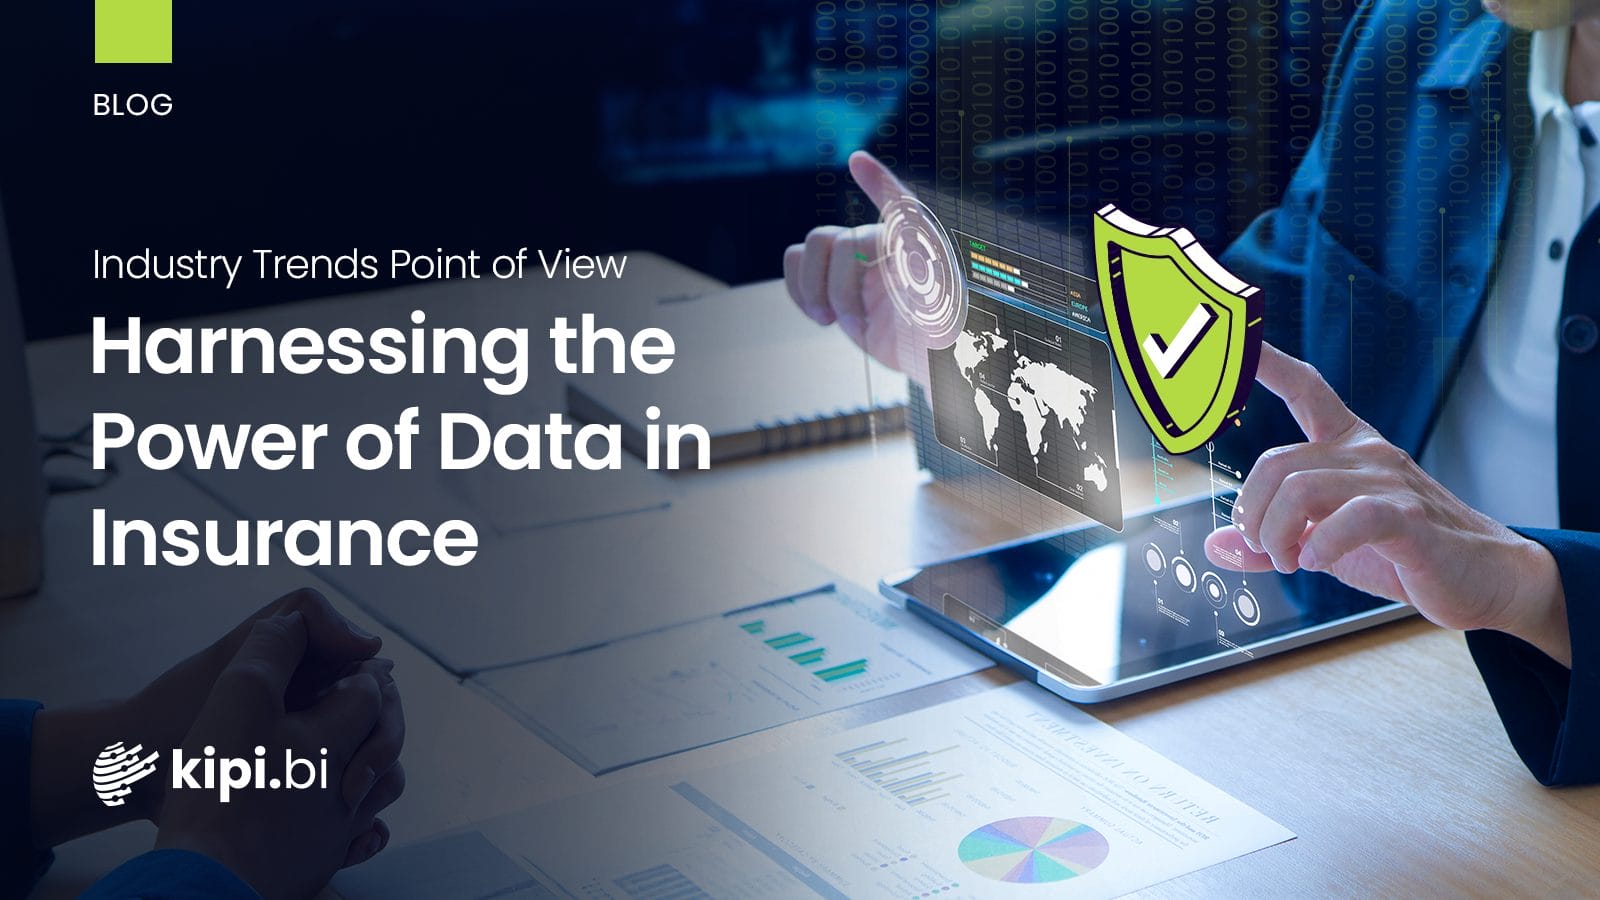 Industry Trends Point of View: Harnessing the Power of Data in Insurance with Snowflake